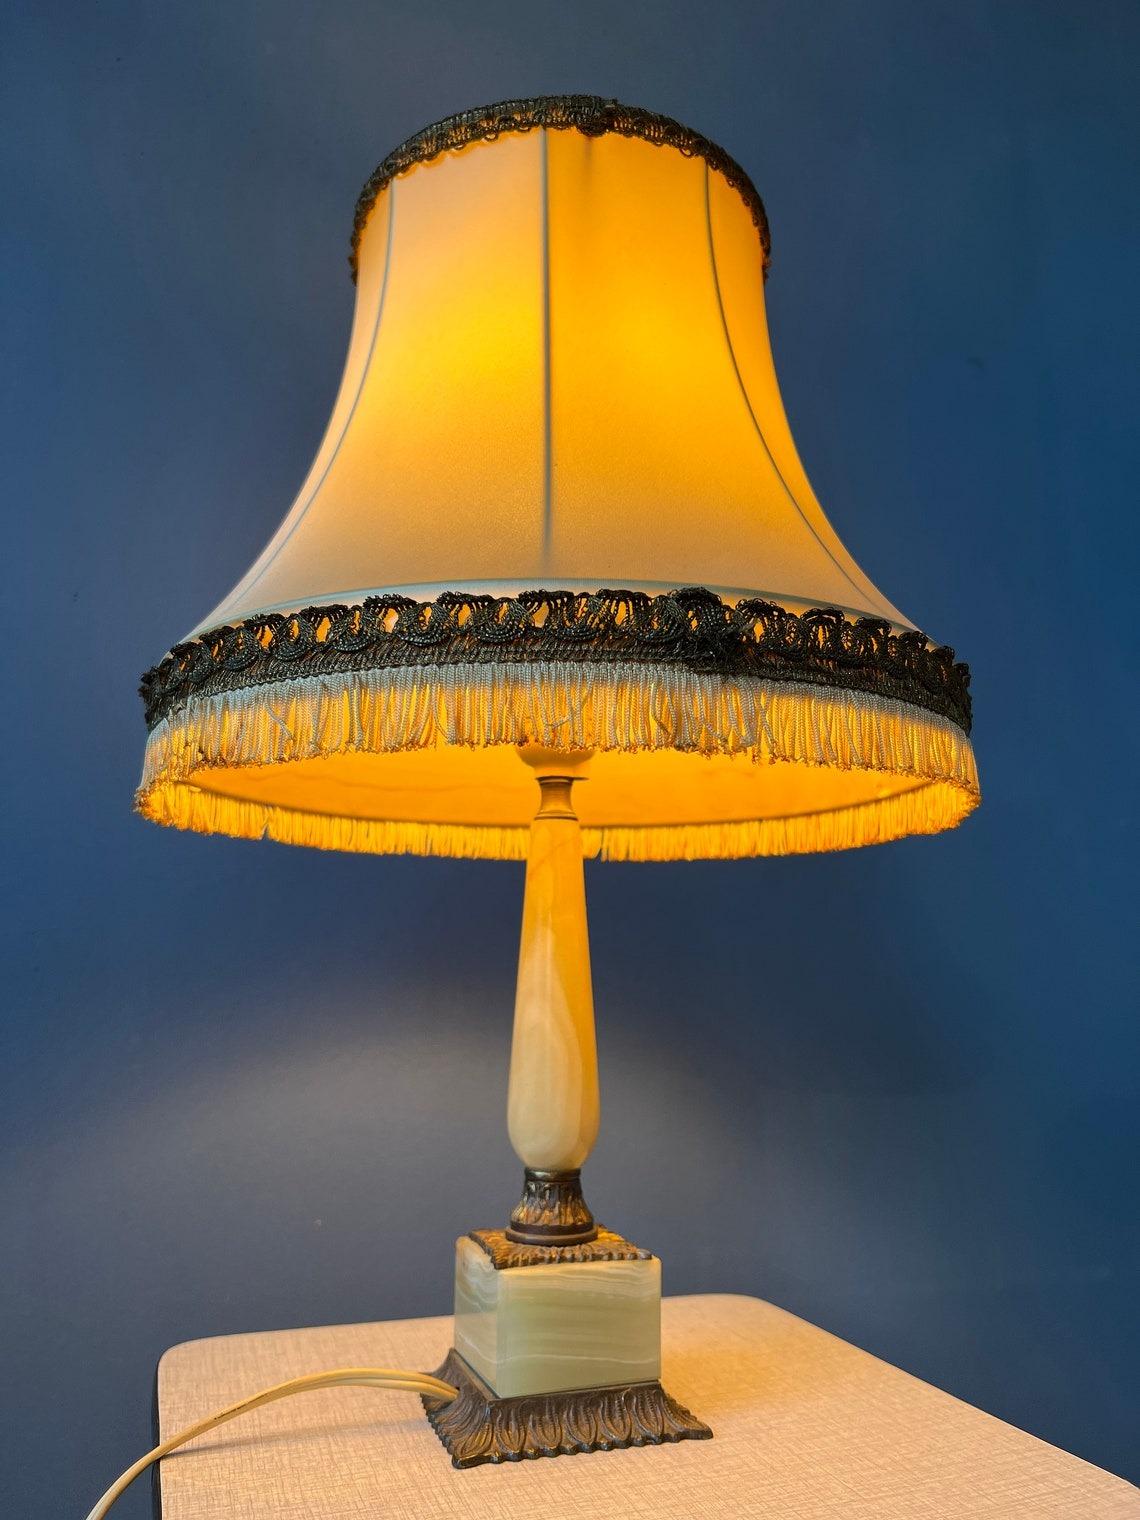 Vintage art deco style table lamp with marble base and textile shade. The lamp requires one E27/26 lightbulb and currently has an EU-plug.

Additional information:
Materials: Linen, metal, stone
Period: 1970s
Dimensions: ø Shade: 22 cm
Height Shade: